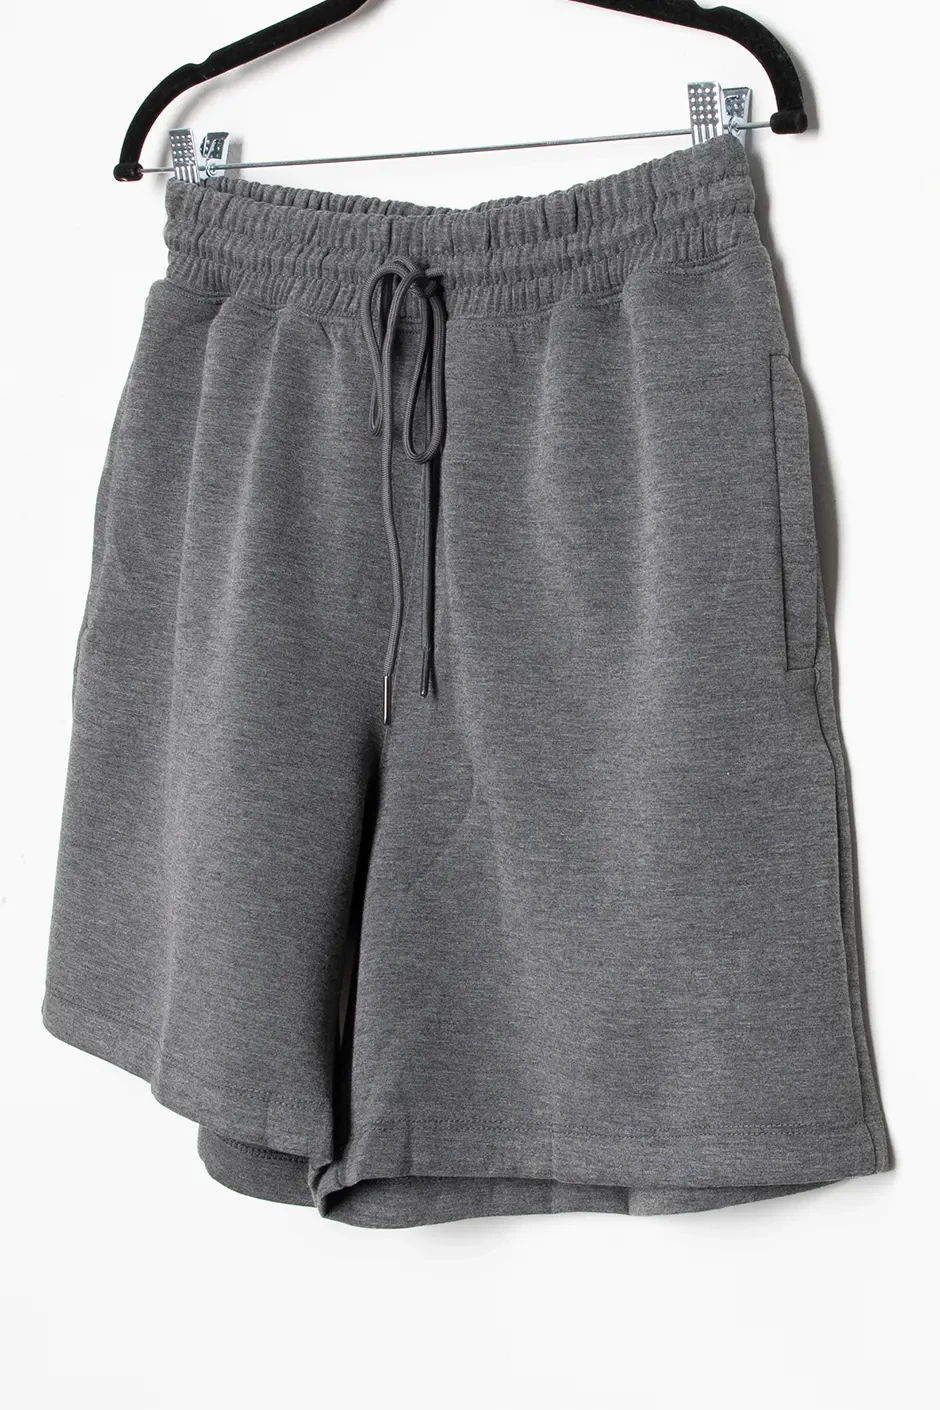 Let's Go Camping Sweat Shorts